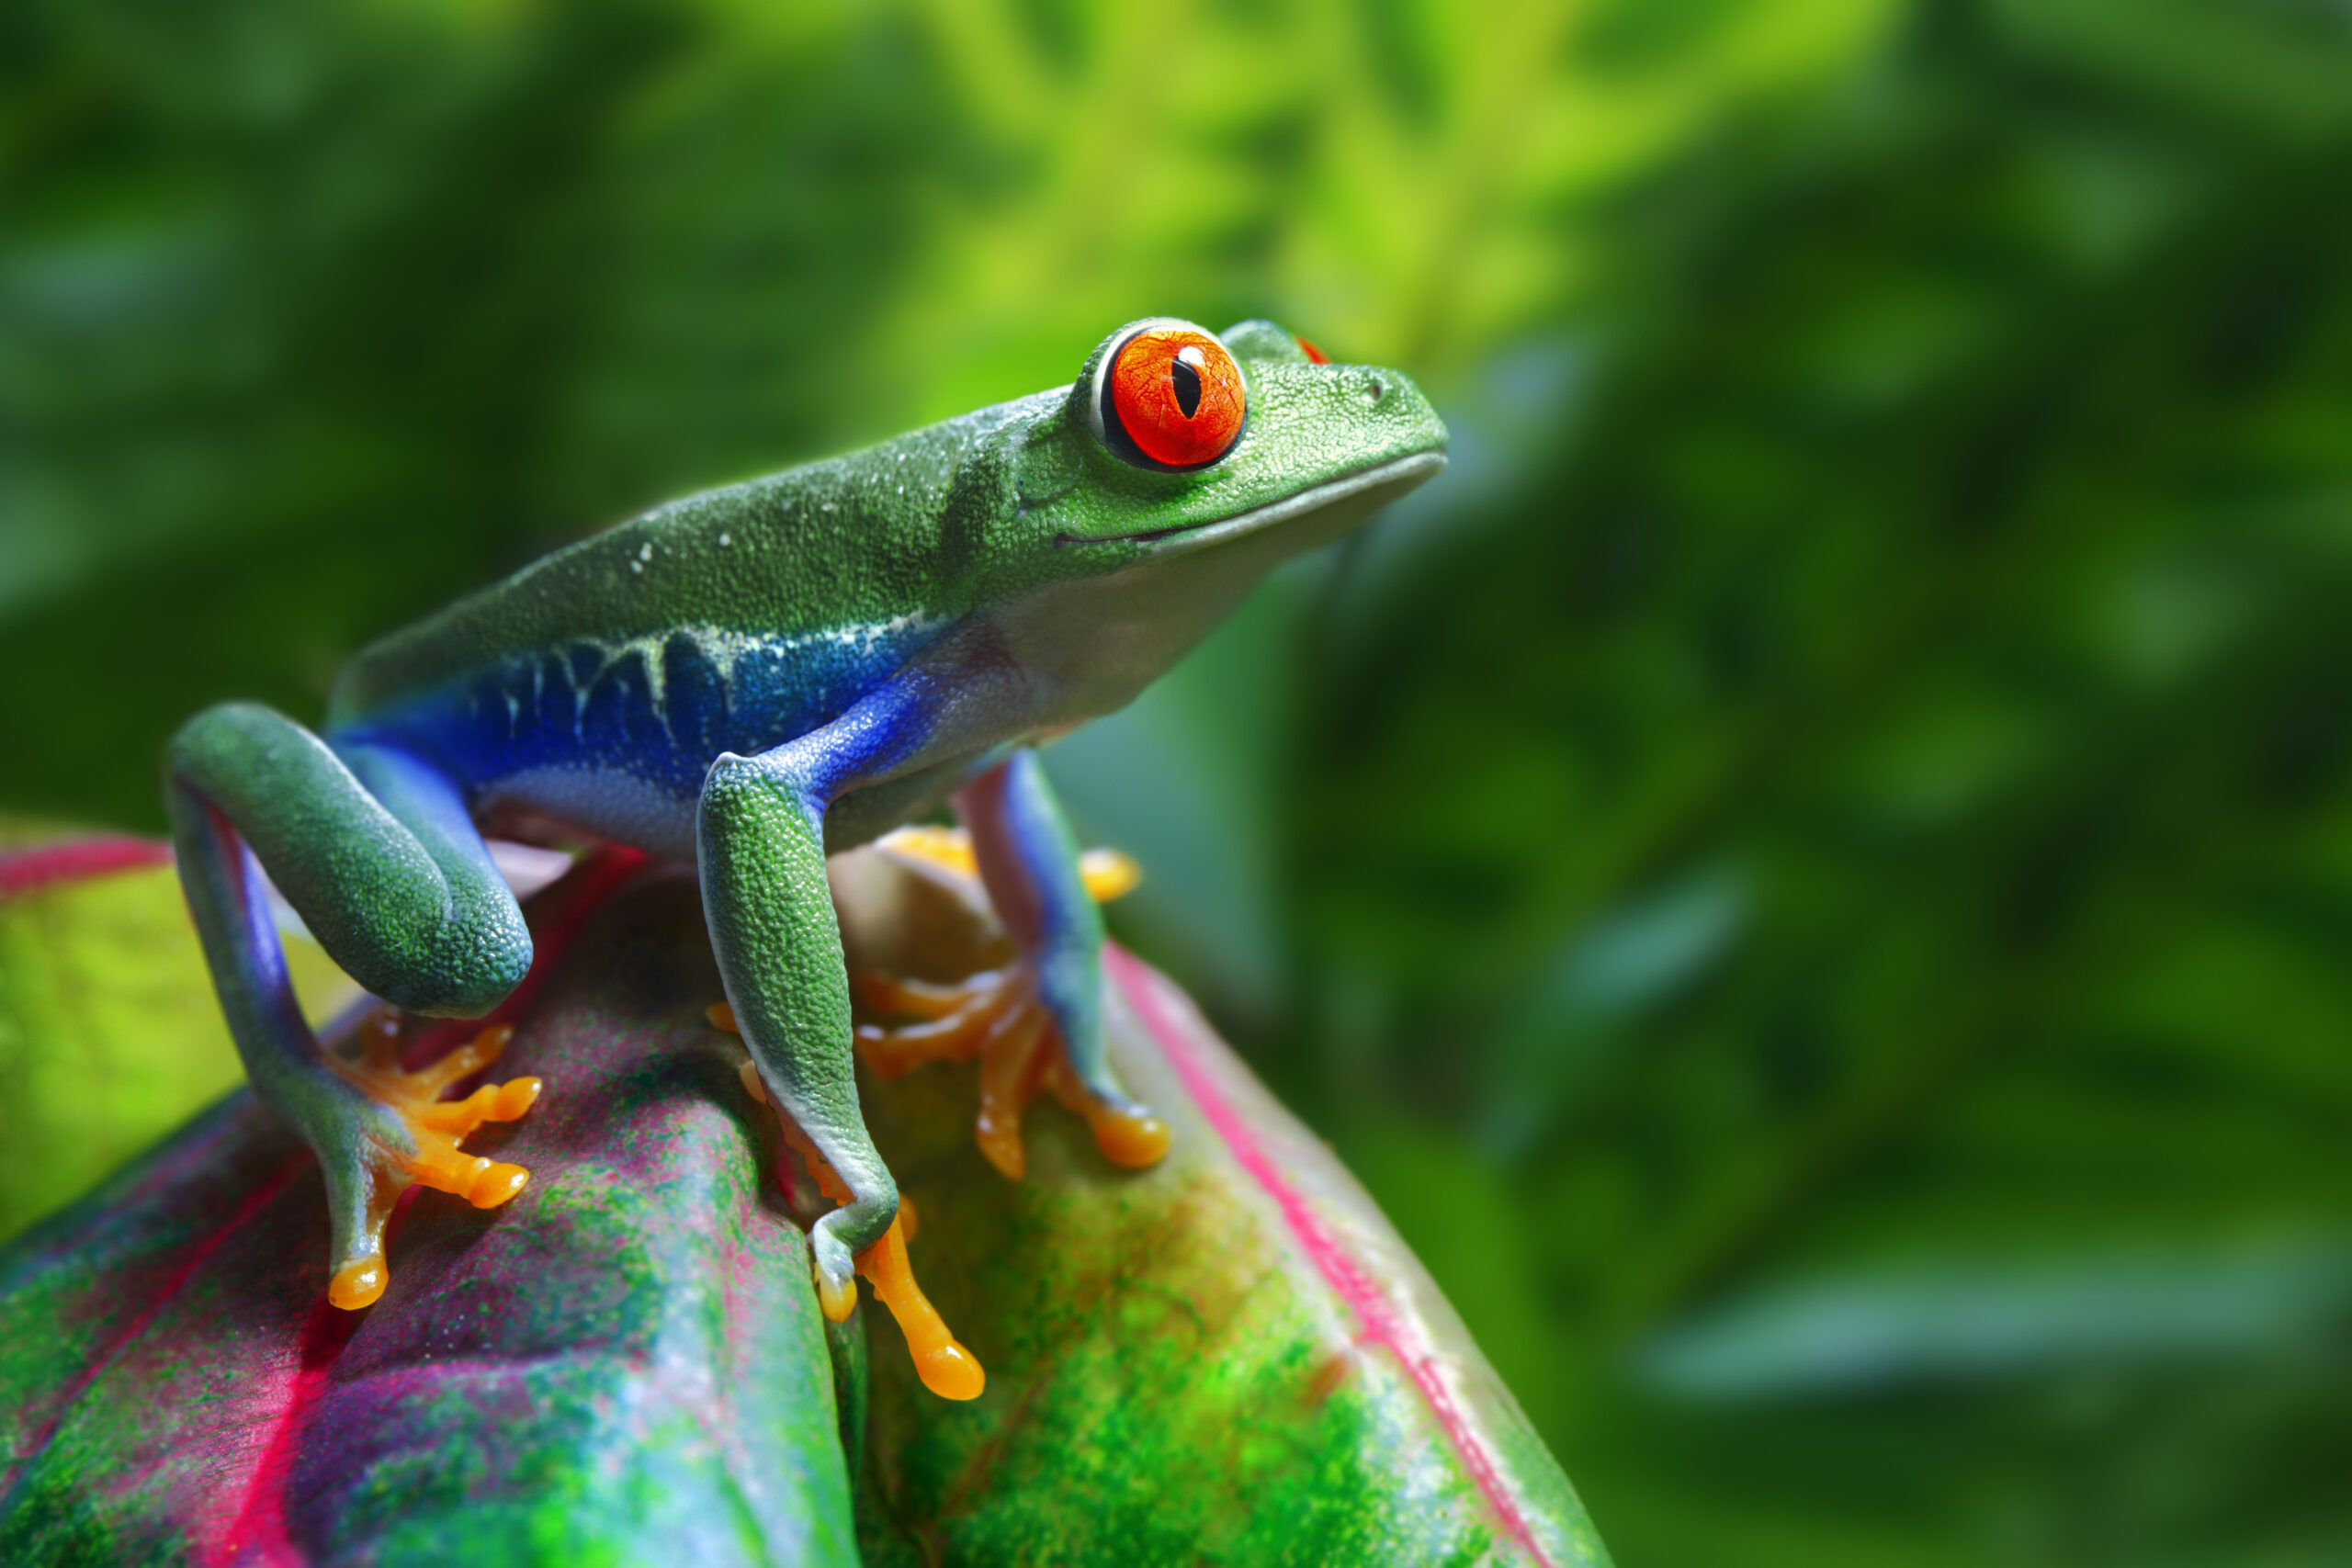 When to go to Costa Rica - Red eyed tree frog in Costa Rica rainforest